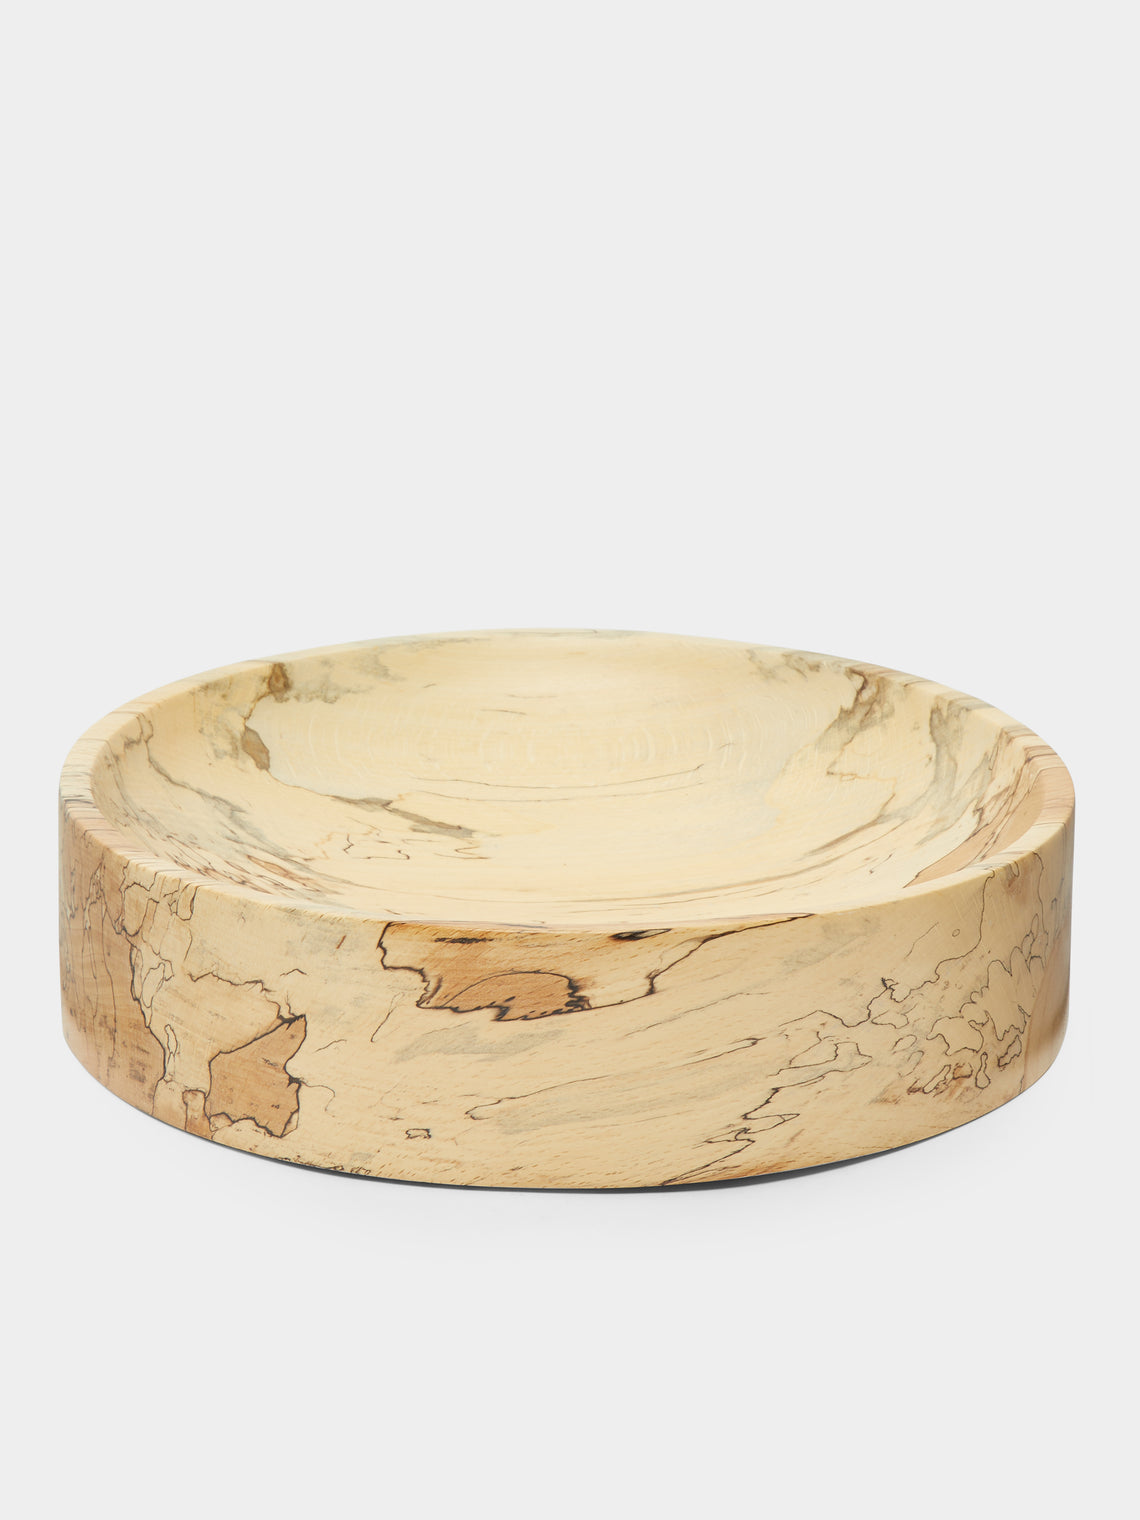 Bird & Branch - Fairlight Hand-Turned Patterned Beech Extra Large Bowl -  - ABASK - 